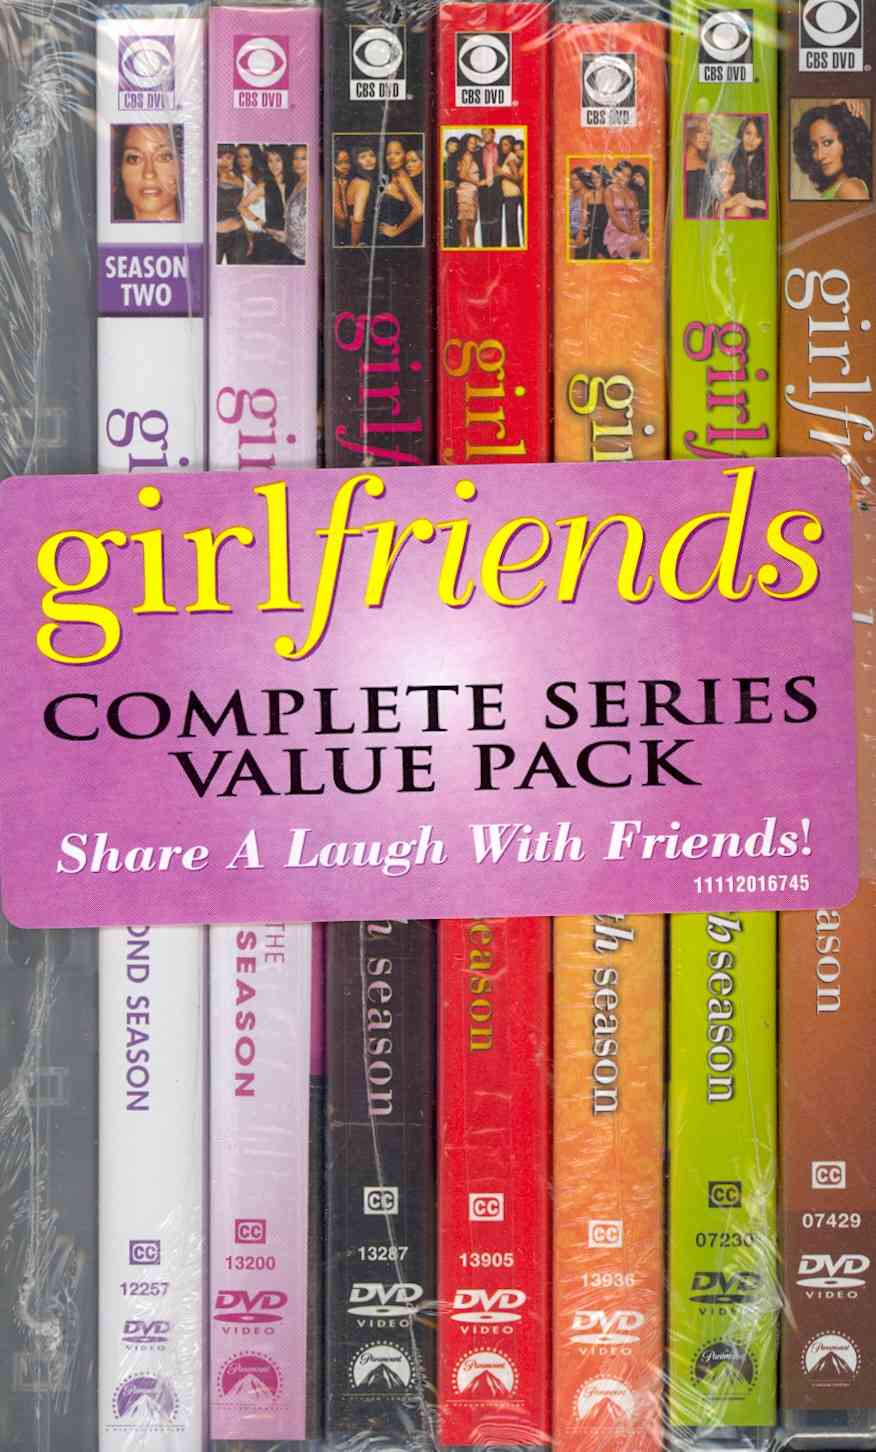 Girlfriends: The Complete Series Pack (Widescreen) - image 1 of 1